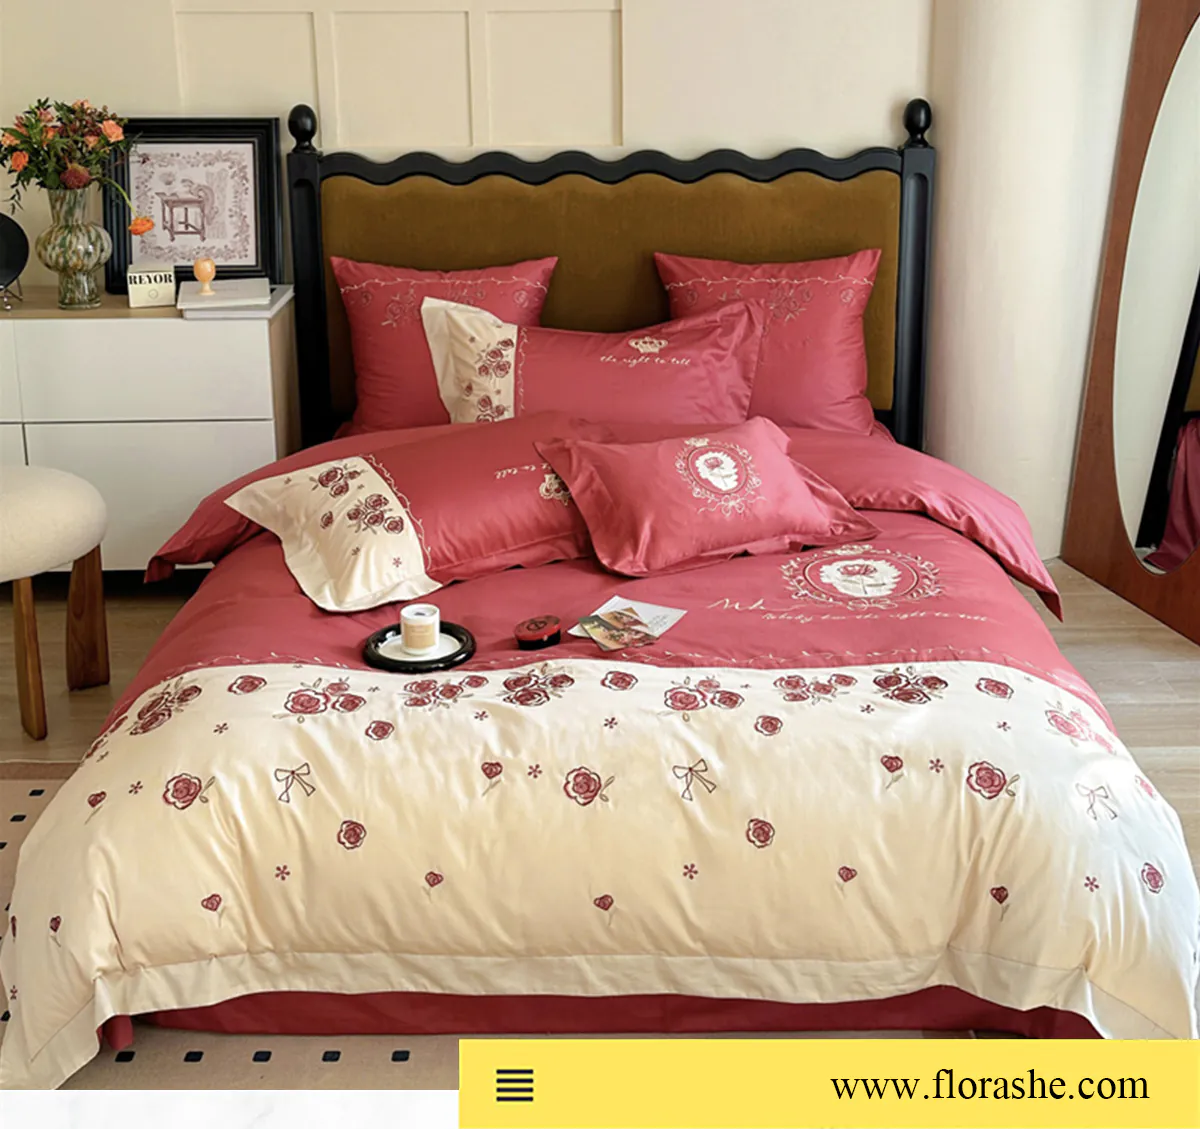 Luxury-Romantic-Rose-1000-Thread-Count-Cotton-Embroidery-Bedding-Set07